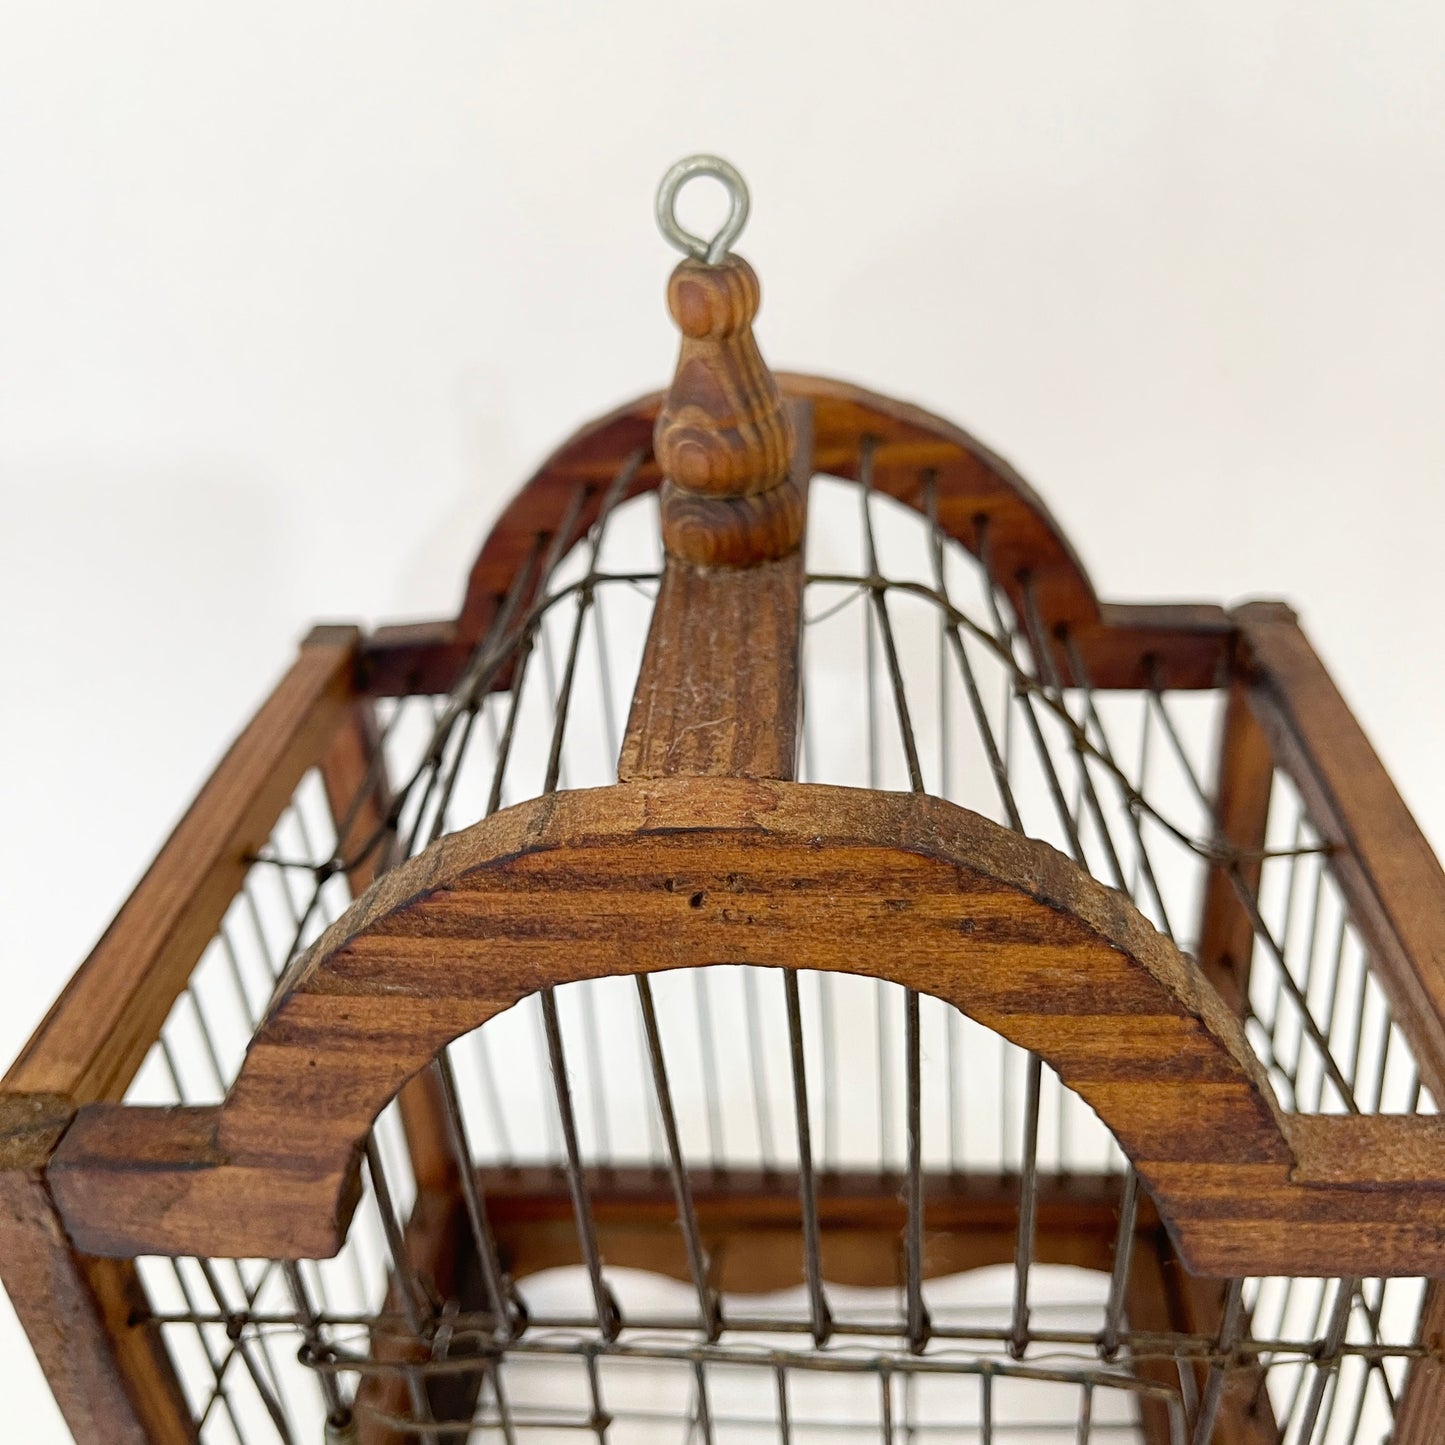 Antique Birdcage - One of a Kind - Wood and Wire